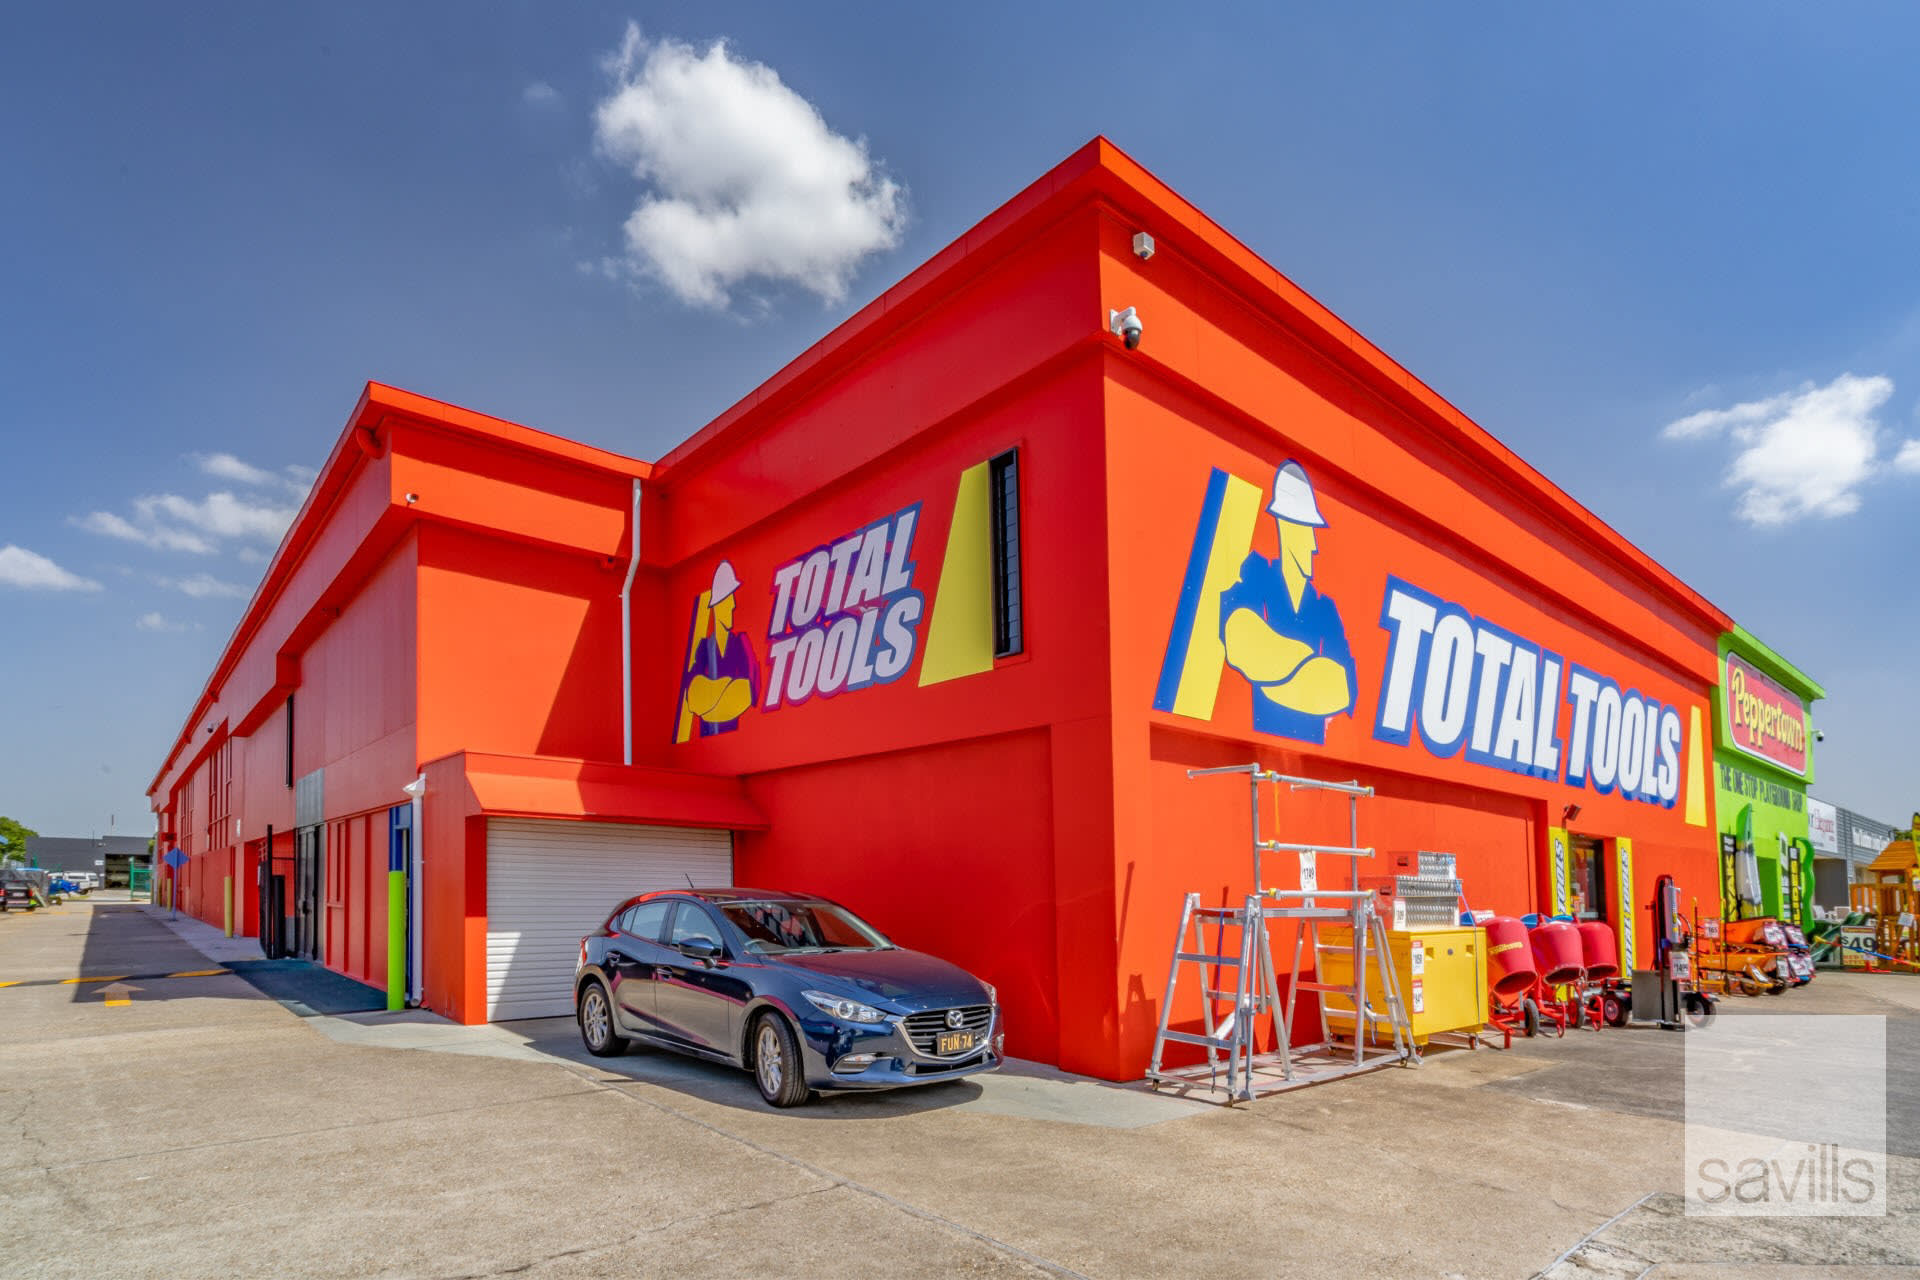 Total Tools Virginia now completed, Electrical, Data, CCTV, and Alarm installation. However motion tracking cameras were added, giving them the ability to follow and zoom up to 30x optically !